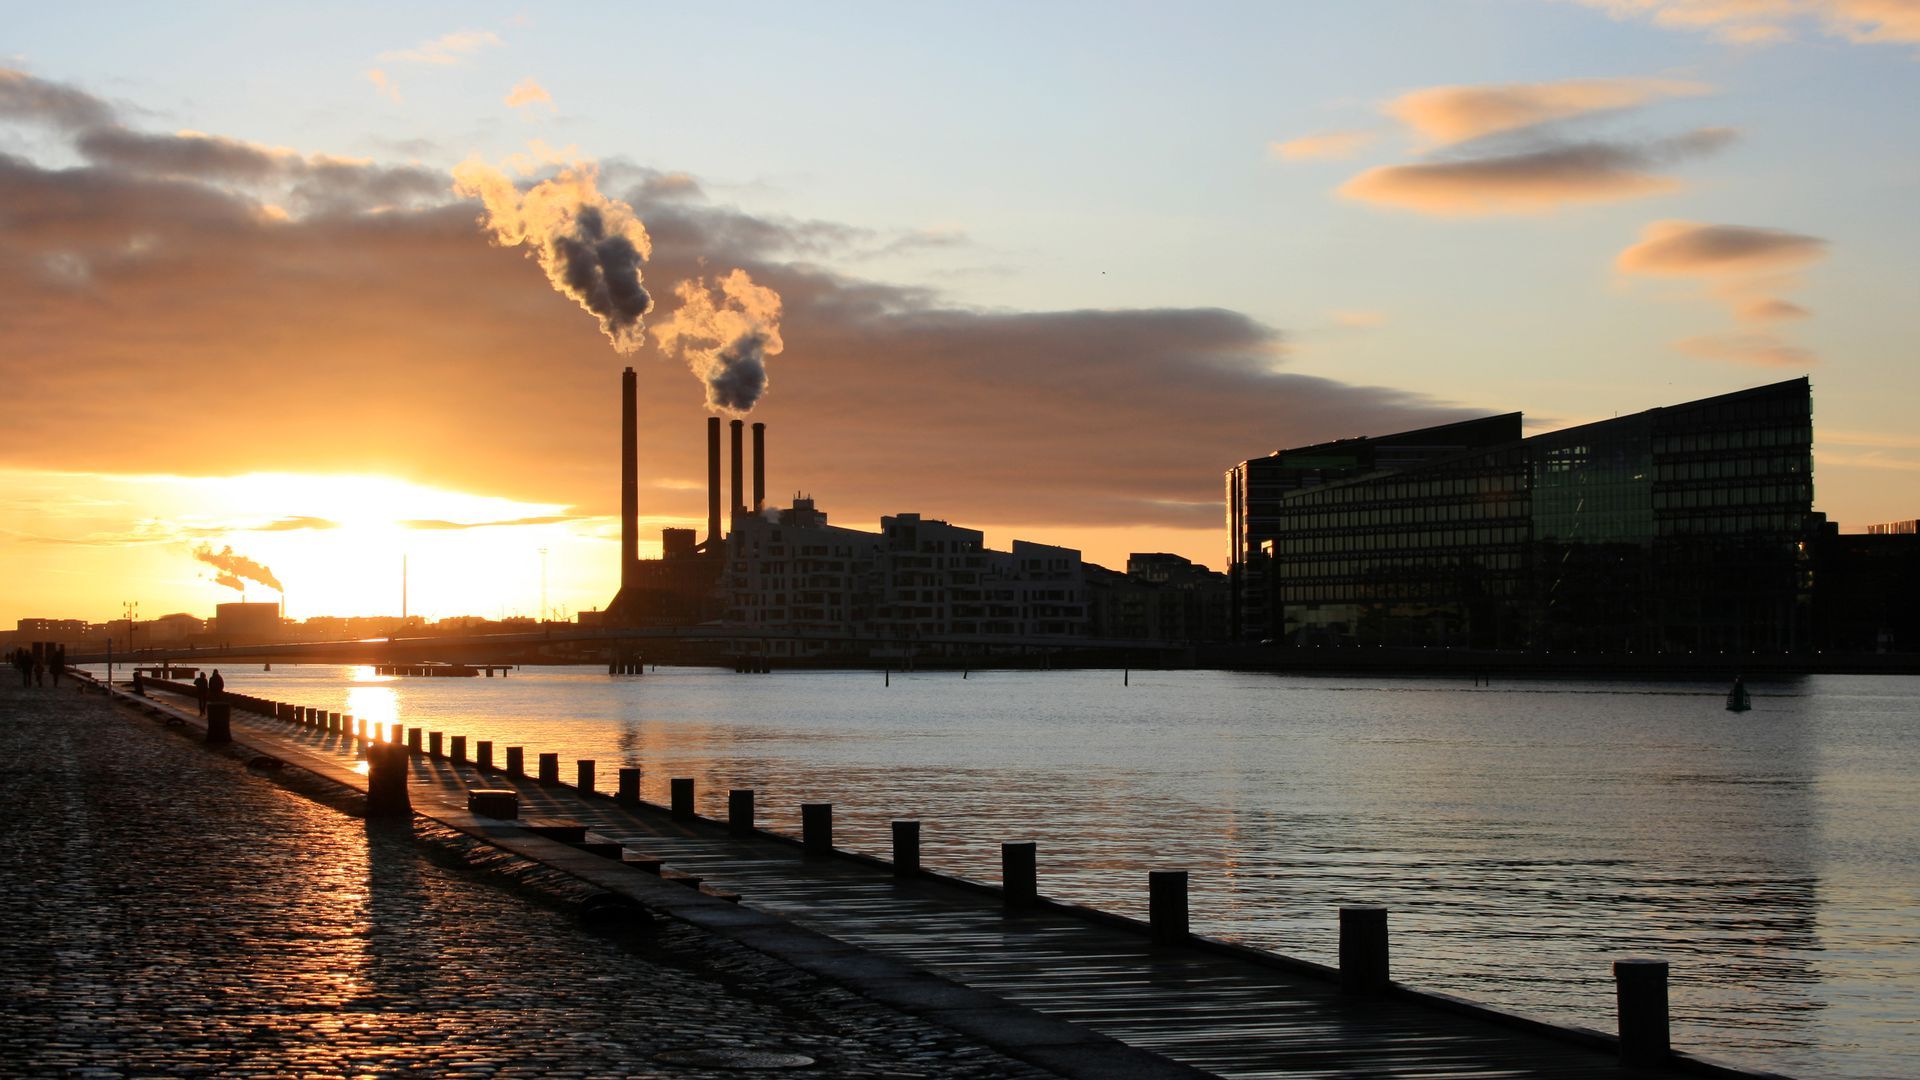 Ørsted Power Station, situated at Sydhavnen in Copenhagen, with the sun rising behind it and the river flowing in front of it